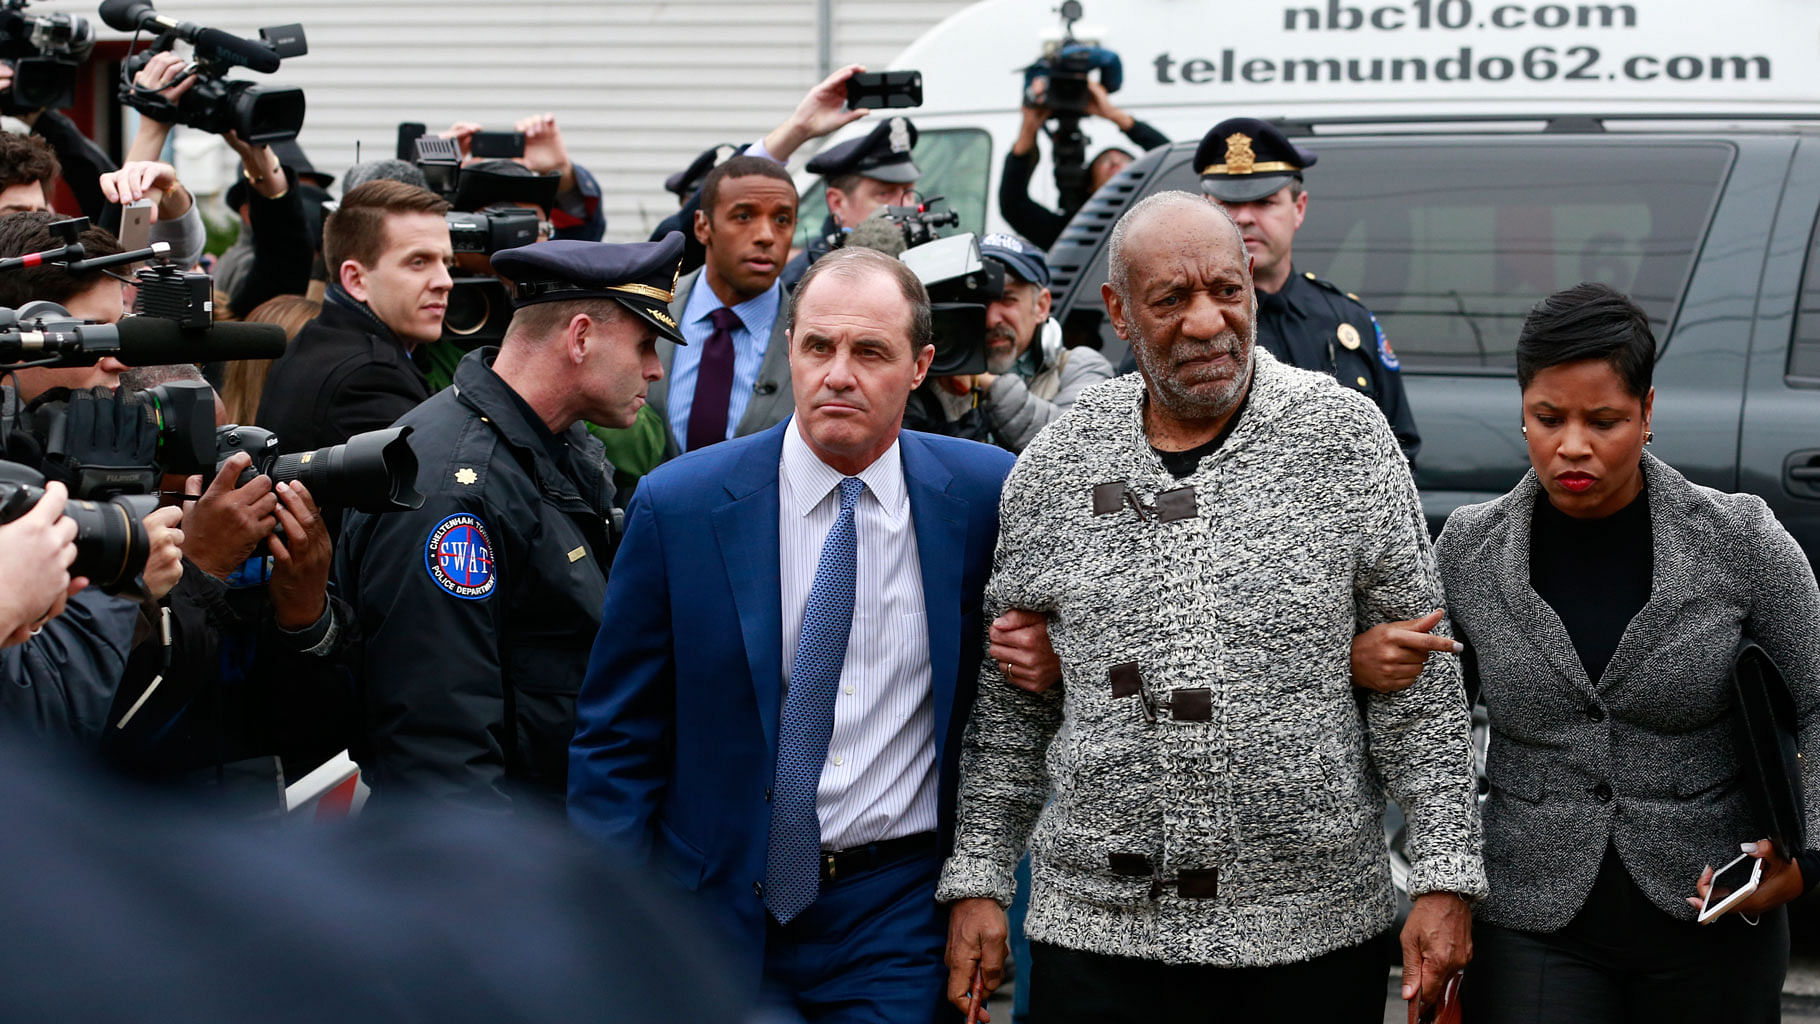 Actor and comedian Bill Cosby is helped as he arrives for a court appearance in 2015.